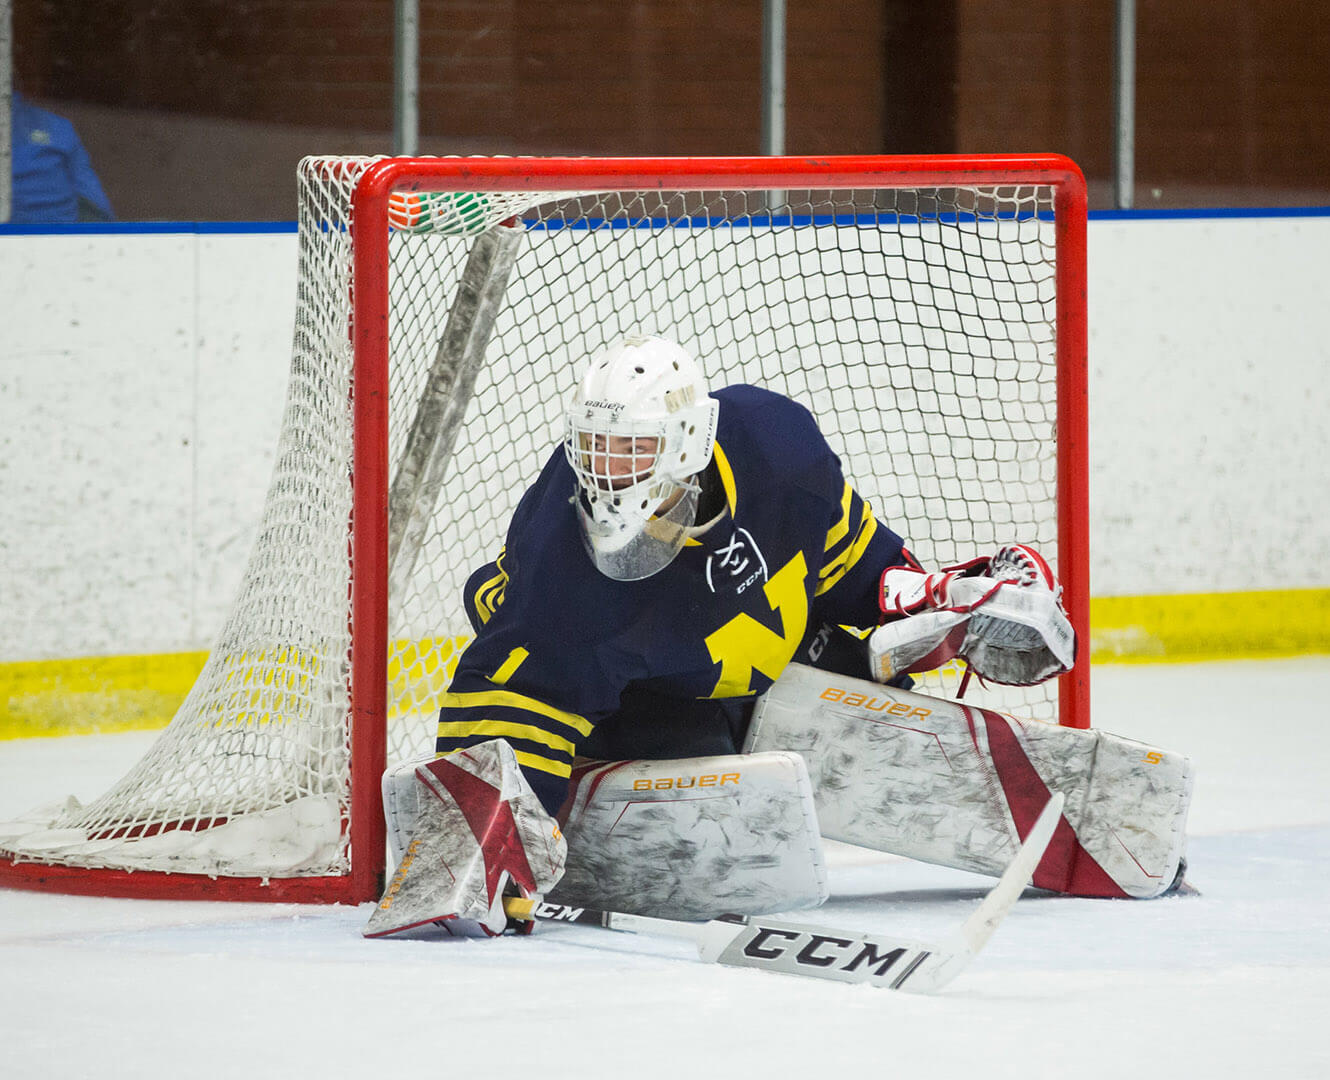 Goalie stops a shot in the net during hockey game